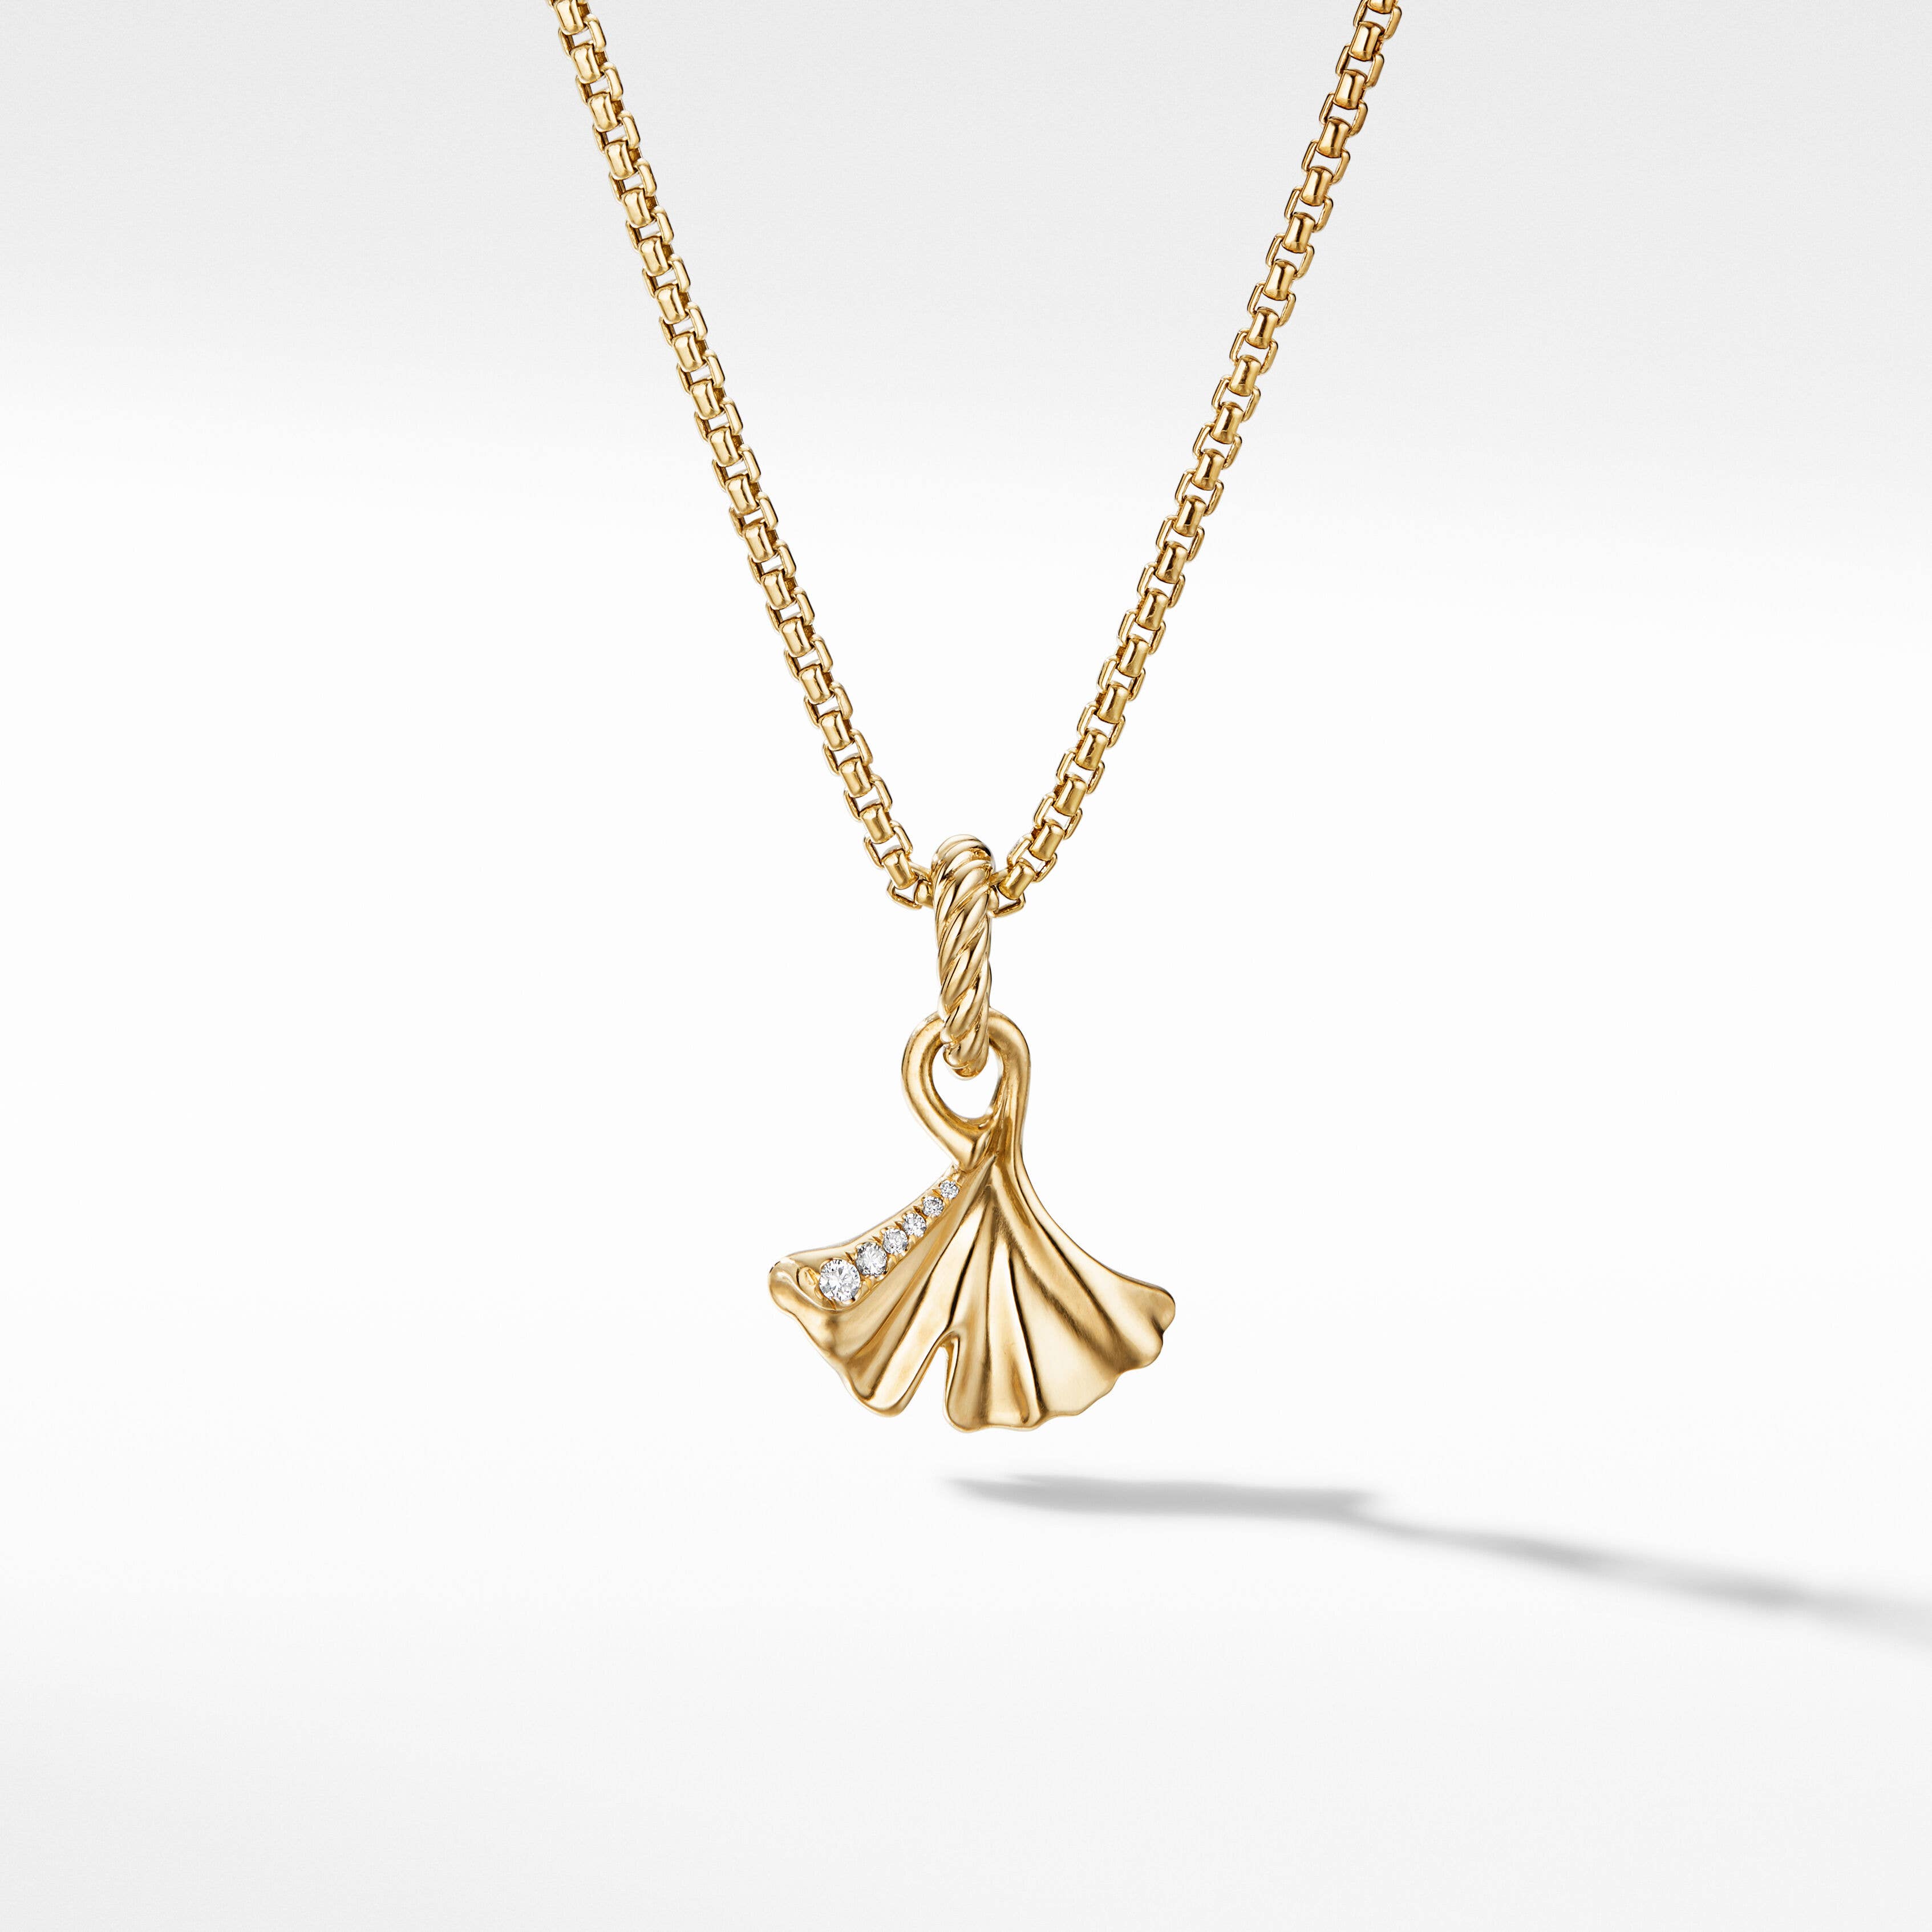 Ginkgo Amulet in 18K Yellow Gold with Pavé Diamonds